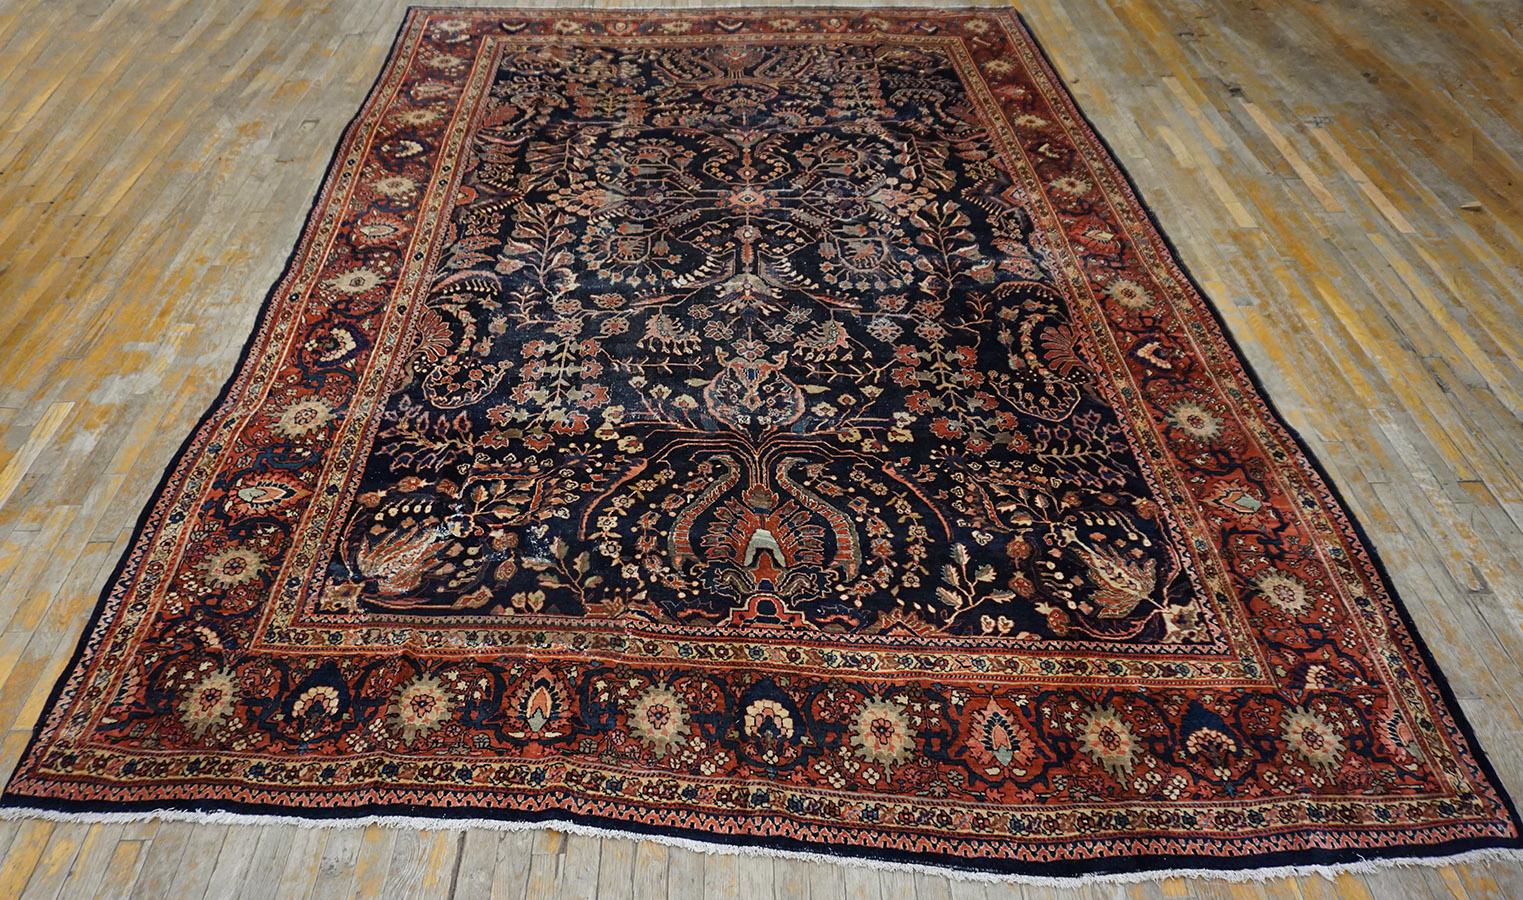 Hand-Knotted Early 20th Century Persian Sarouk Farahan Carpet ( 8'8